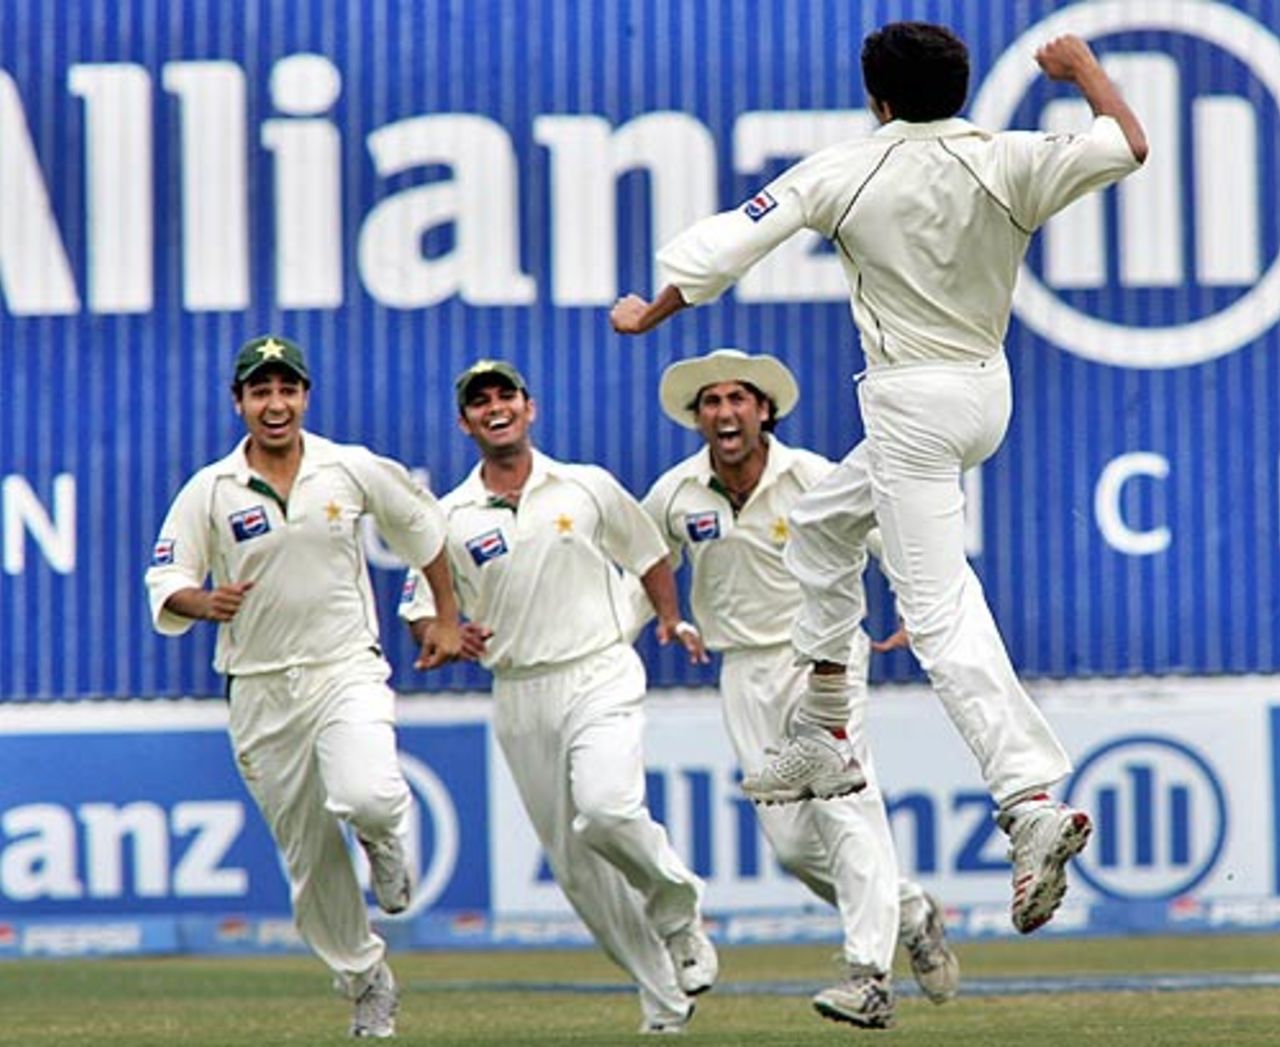 Celebration time for Mohammad Asif and Pakistan, Pakistan v India, 3rd Test, 4th day, Karachi, February 1,2006